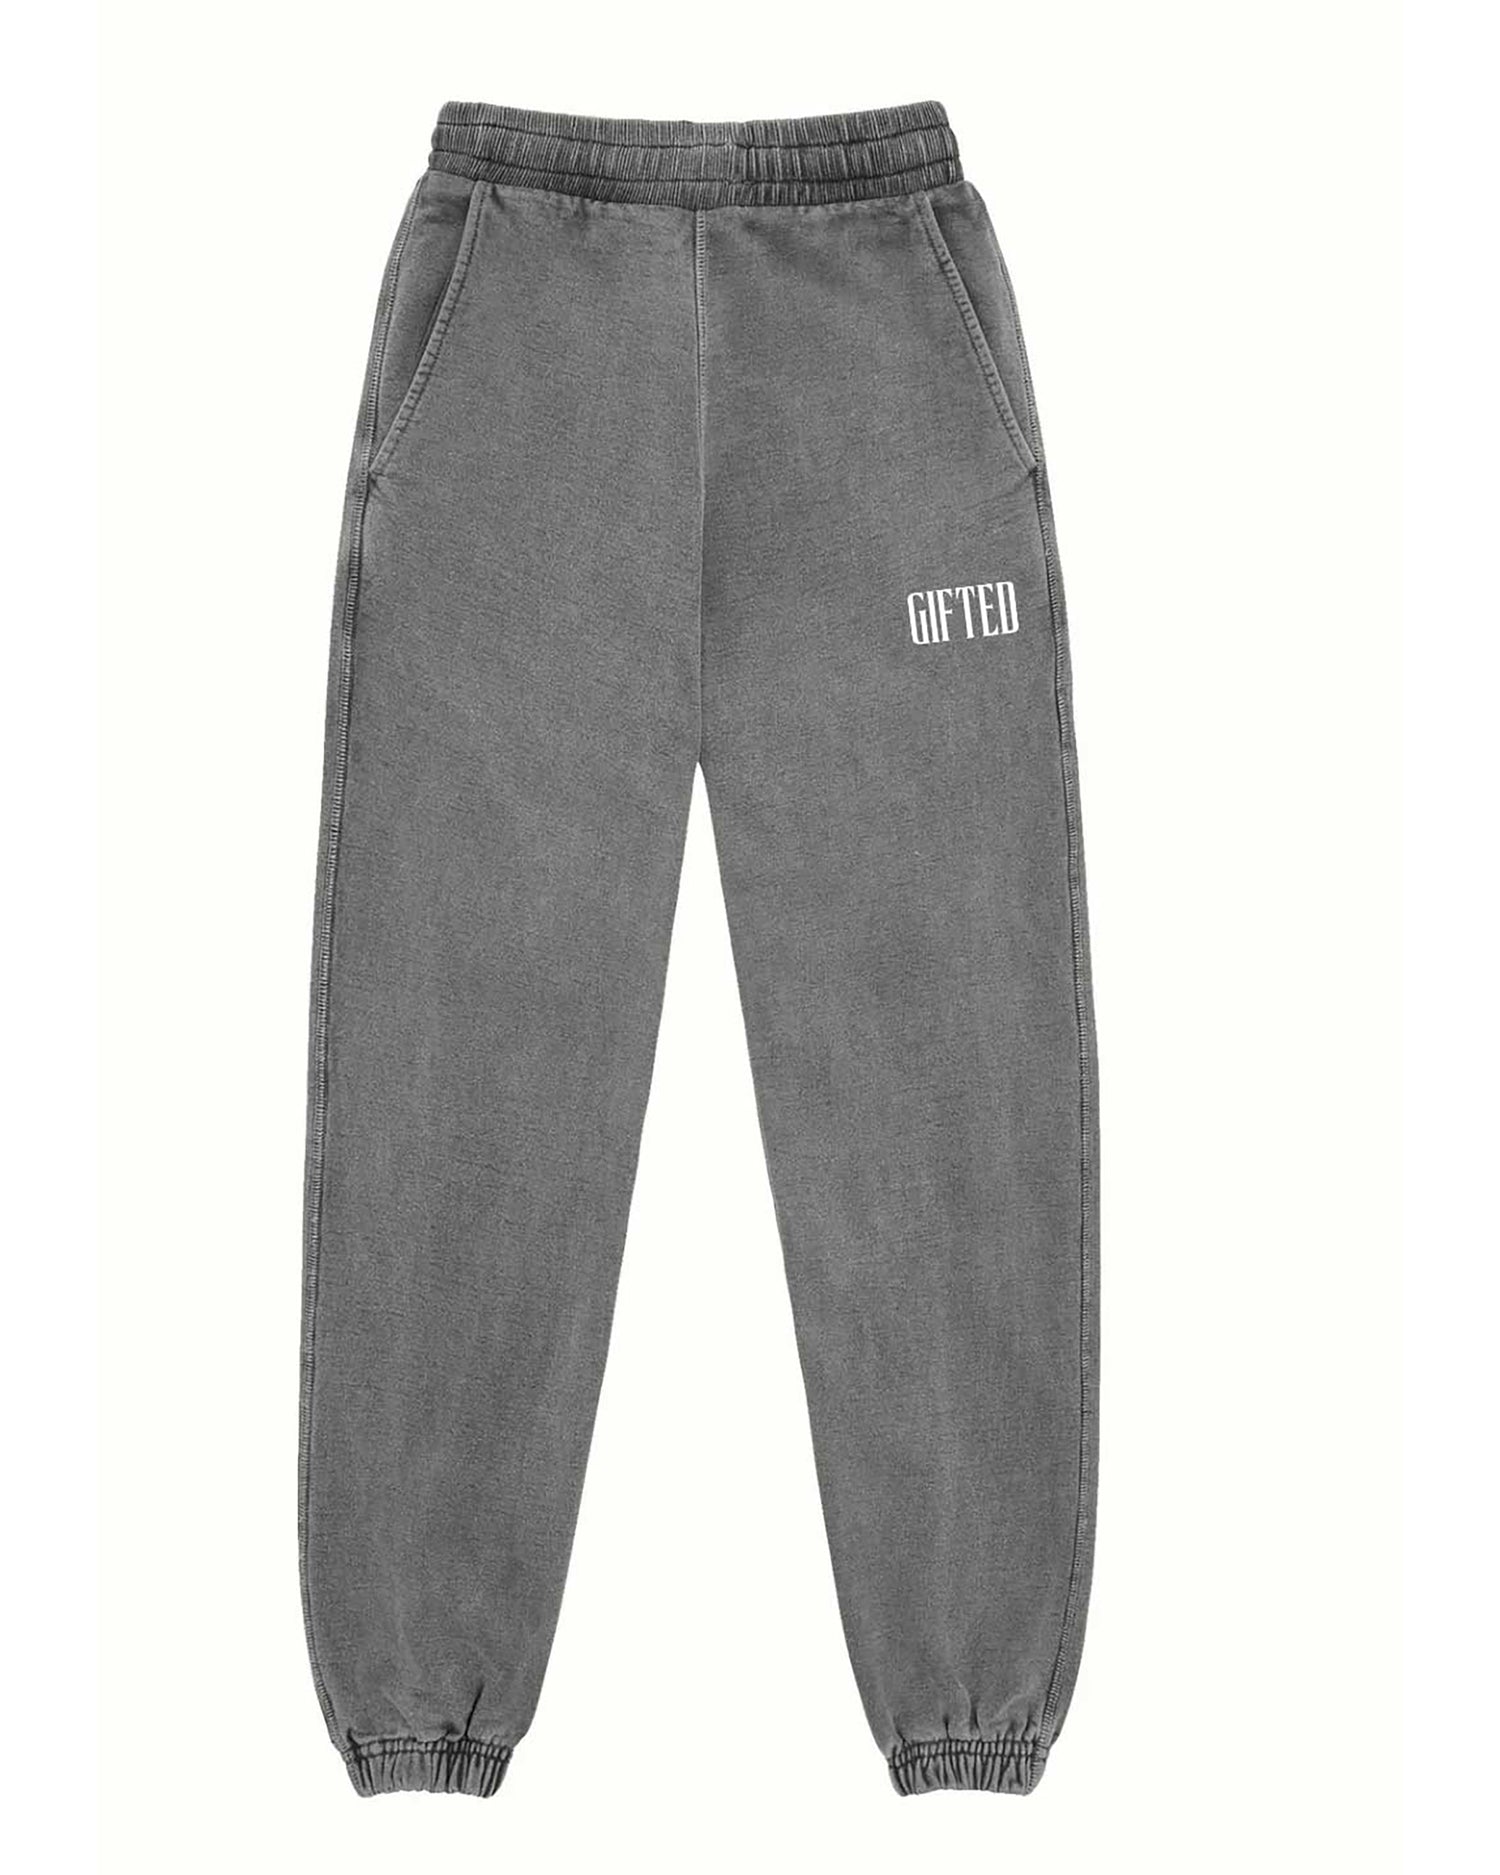 Gifted Joggers - Washed Charcoal